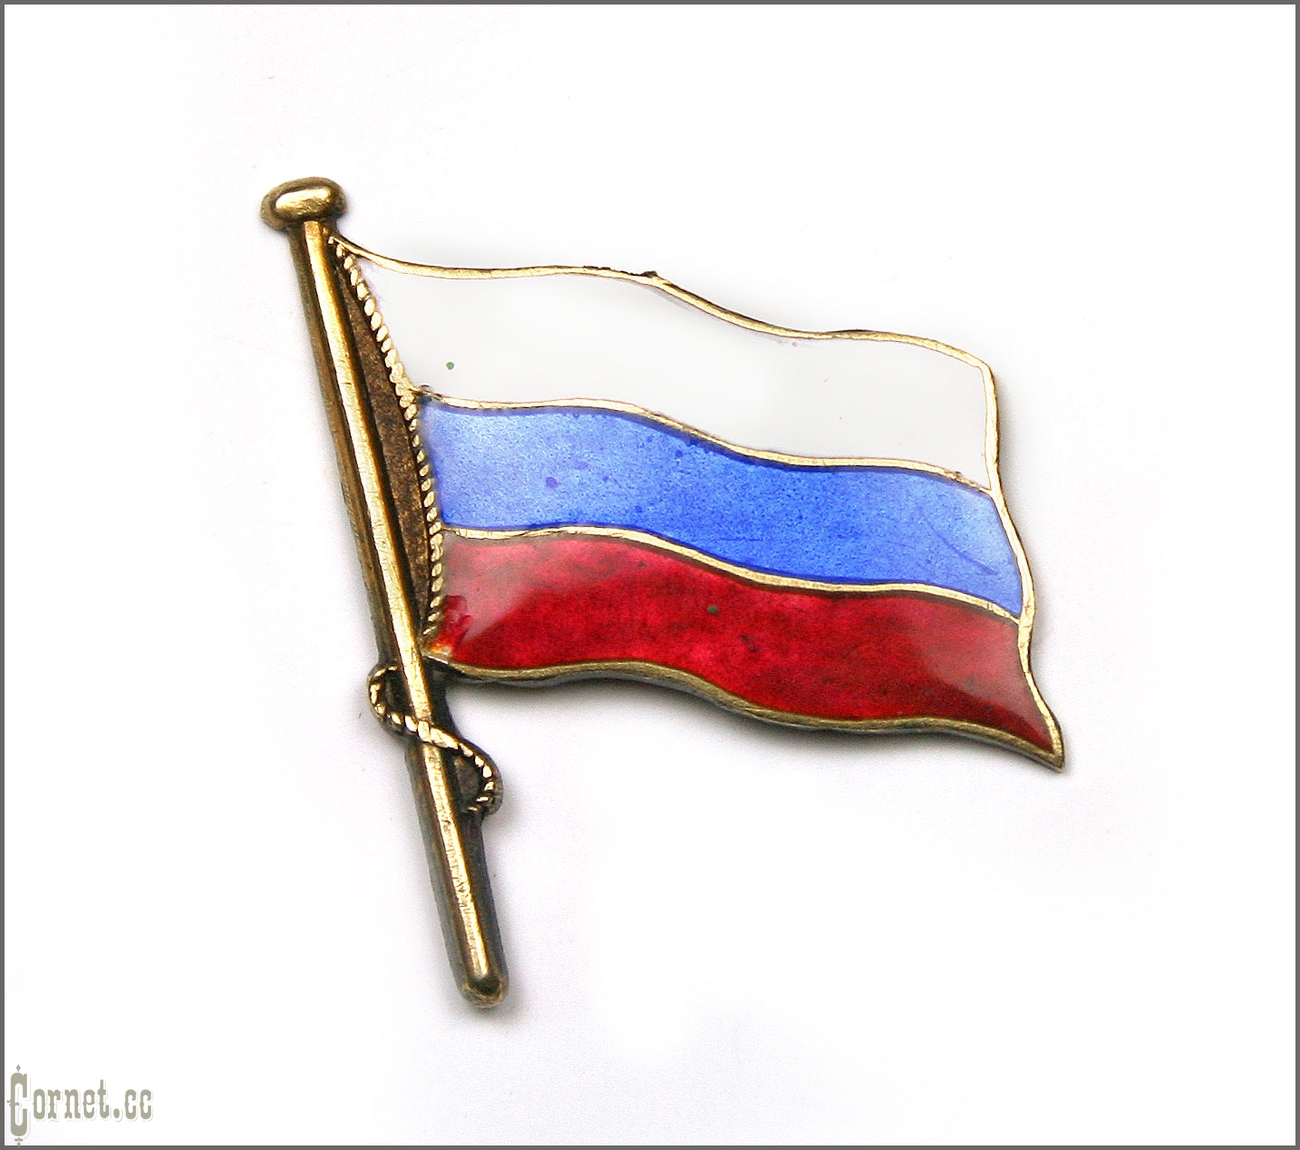 The badge "Russian flag"